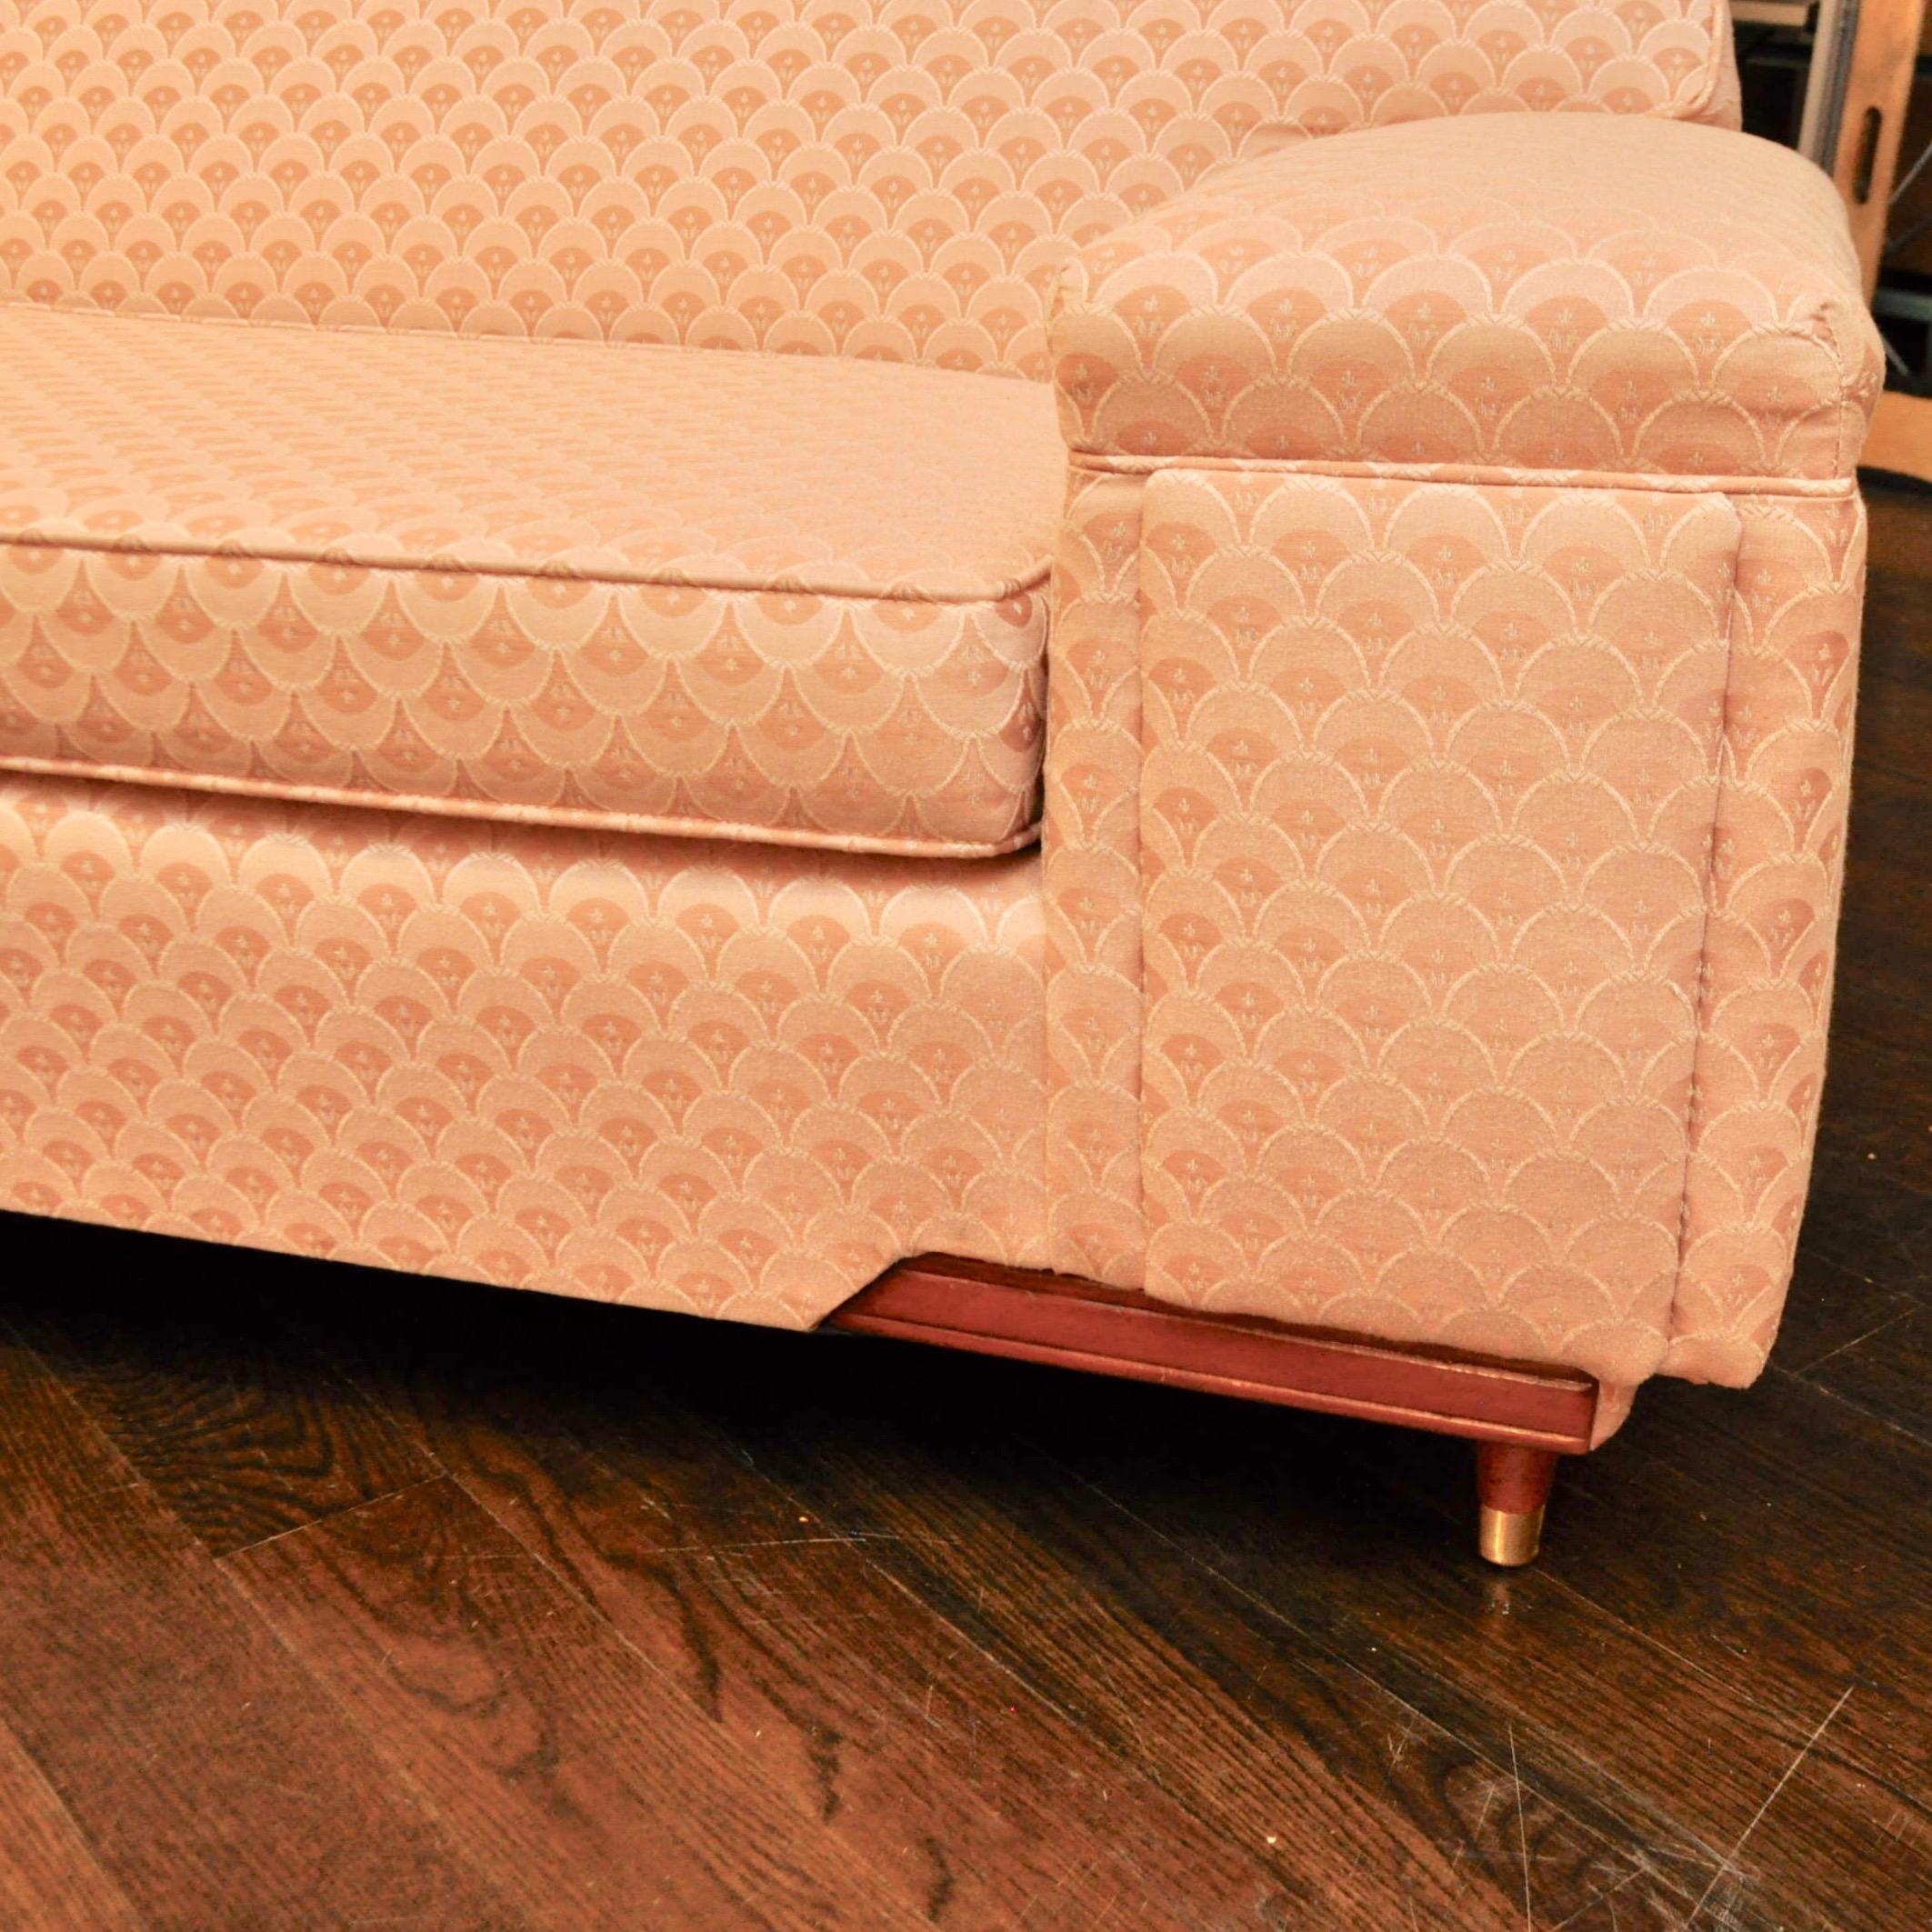 This sectional must have been wrapped in clear vinyl most of its life because its vintage upholstery is in like new condition. Even the original peachy pink arm covers are present. If you're looking for an iconic fifties-shaped sectional, this would